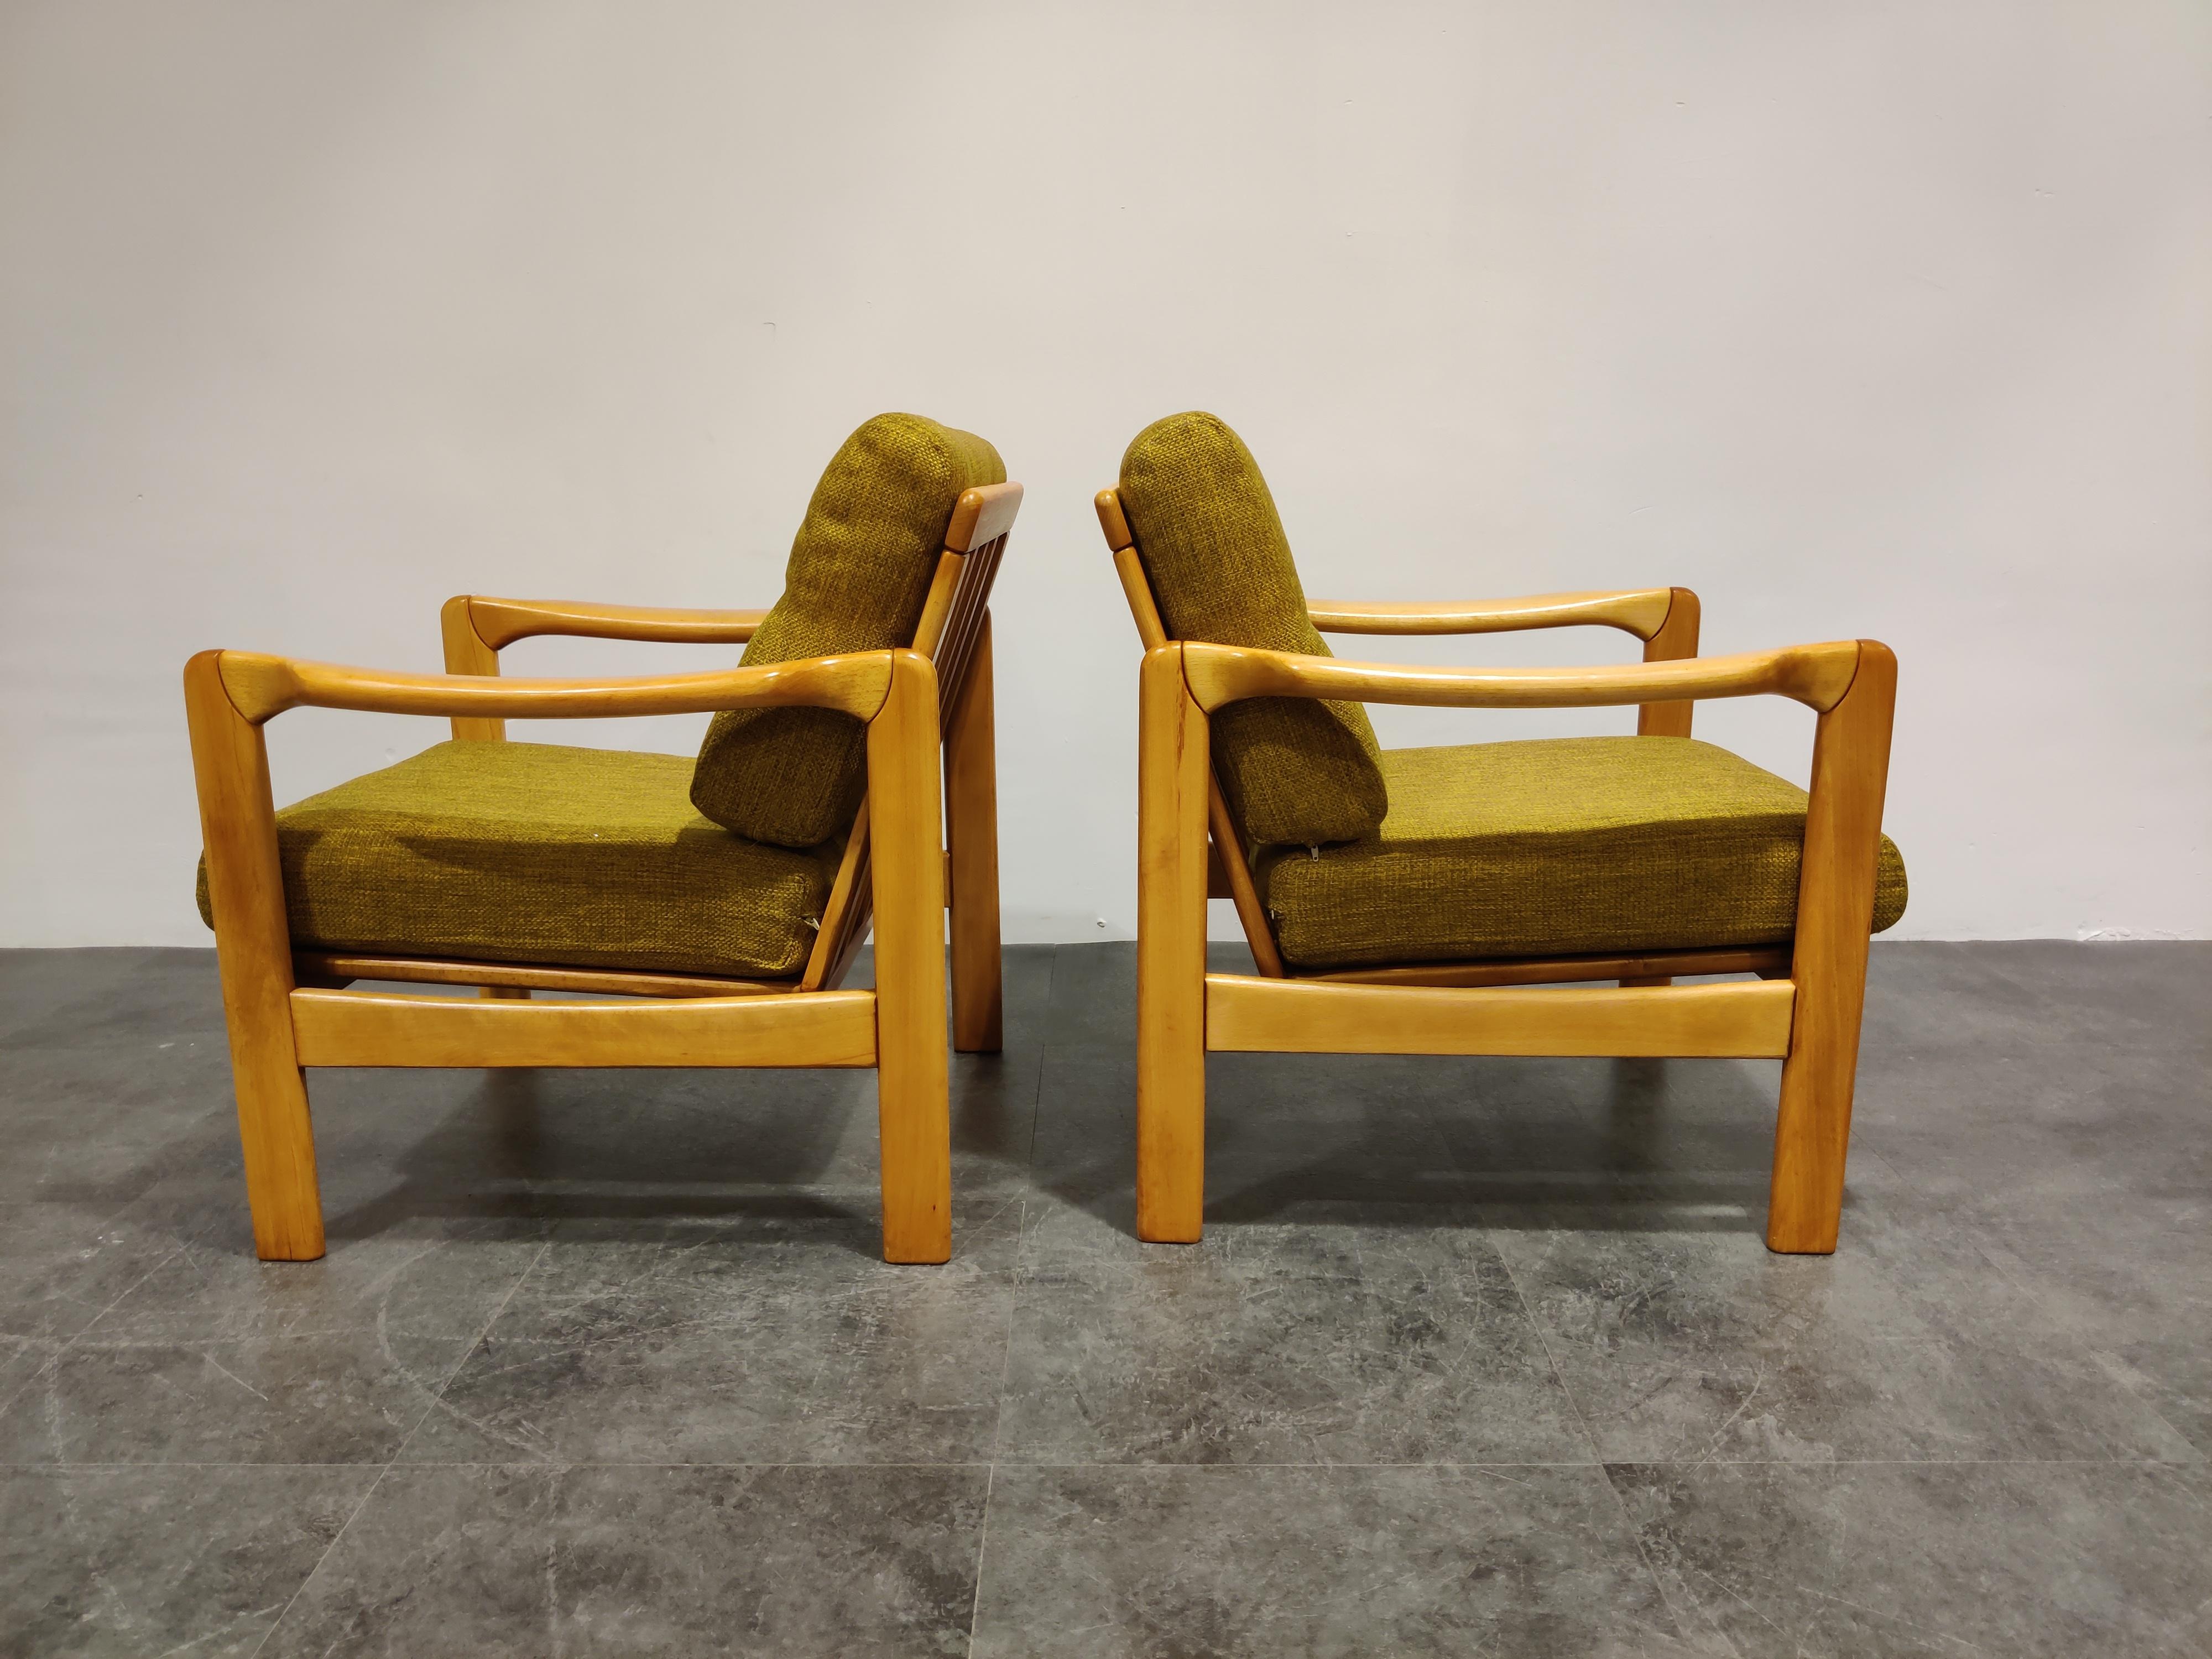 German Midcentury Armchairs by Walter Knoll, 1960s For Sale